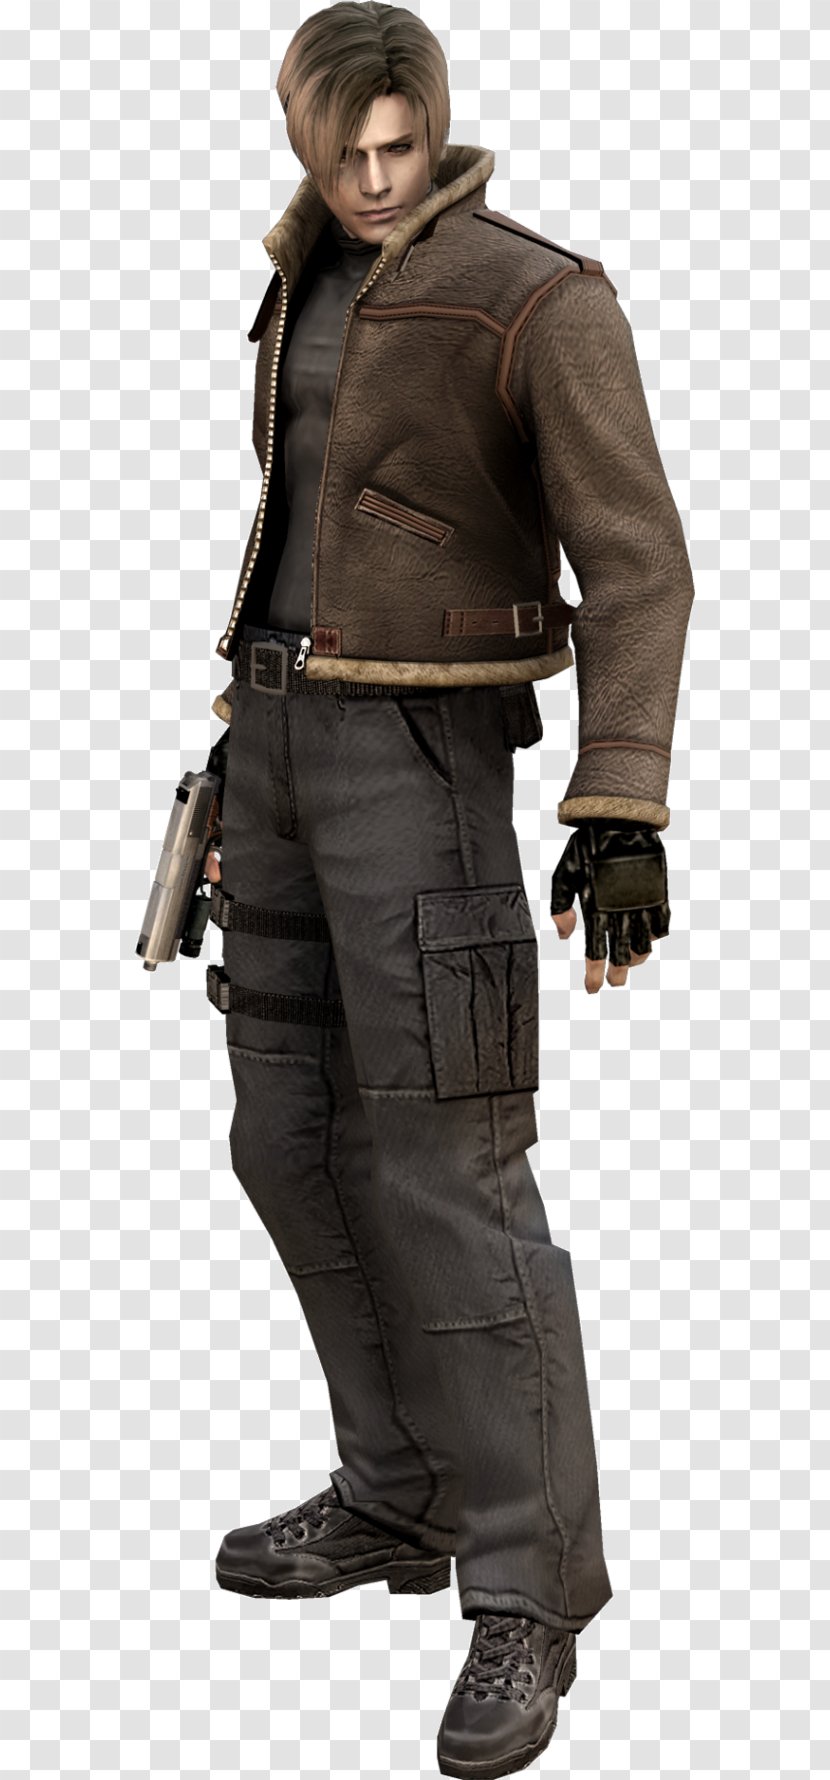 Resident Evil 4 6 2 Minecraft Leon S. Kennedy Transparent PNG